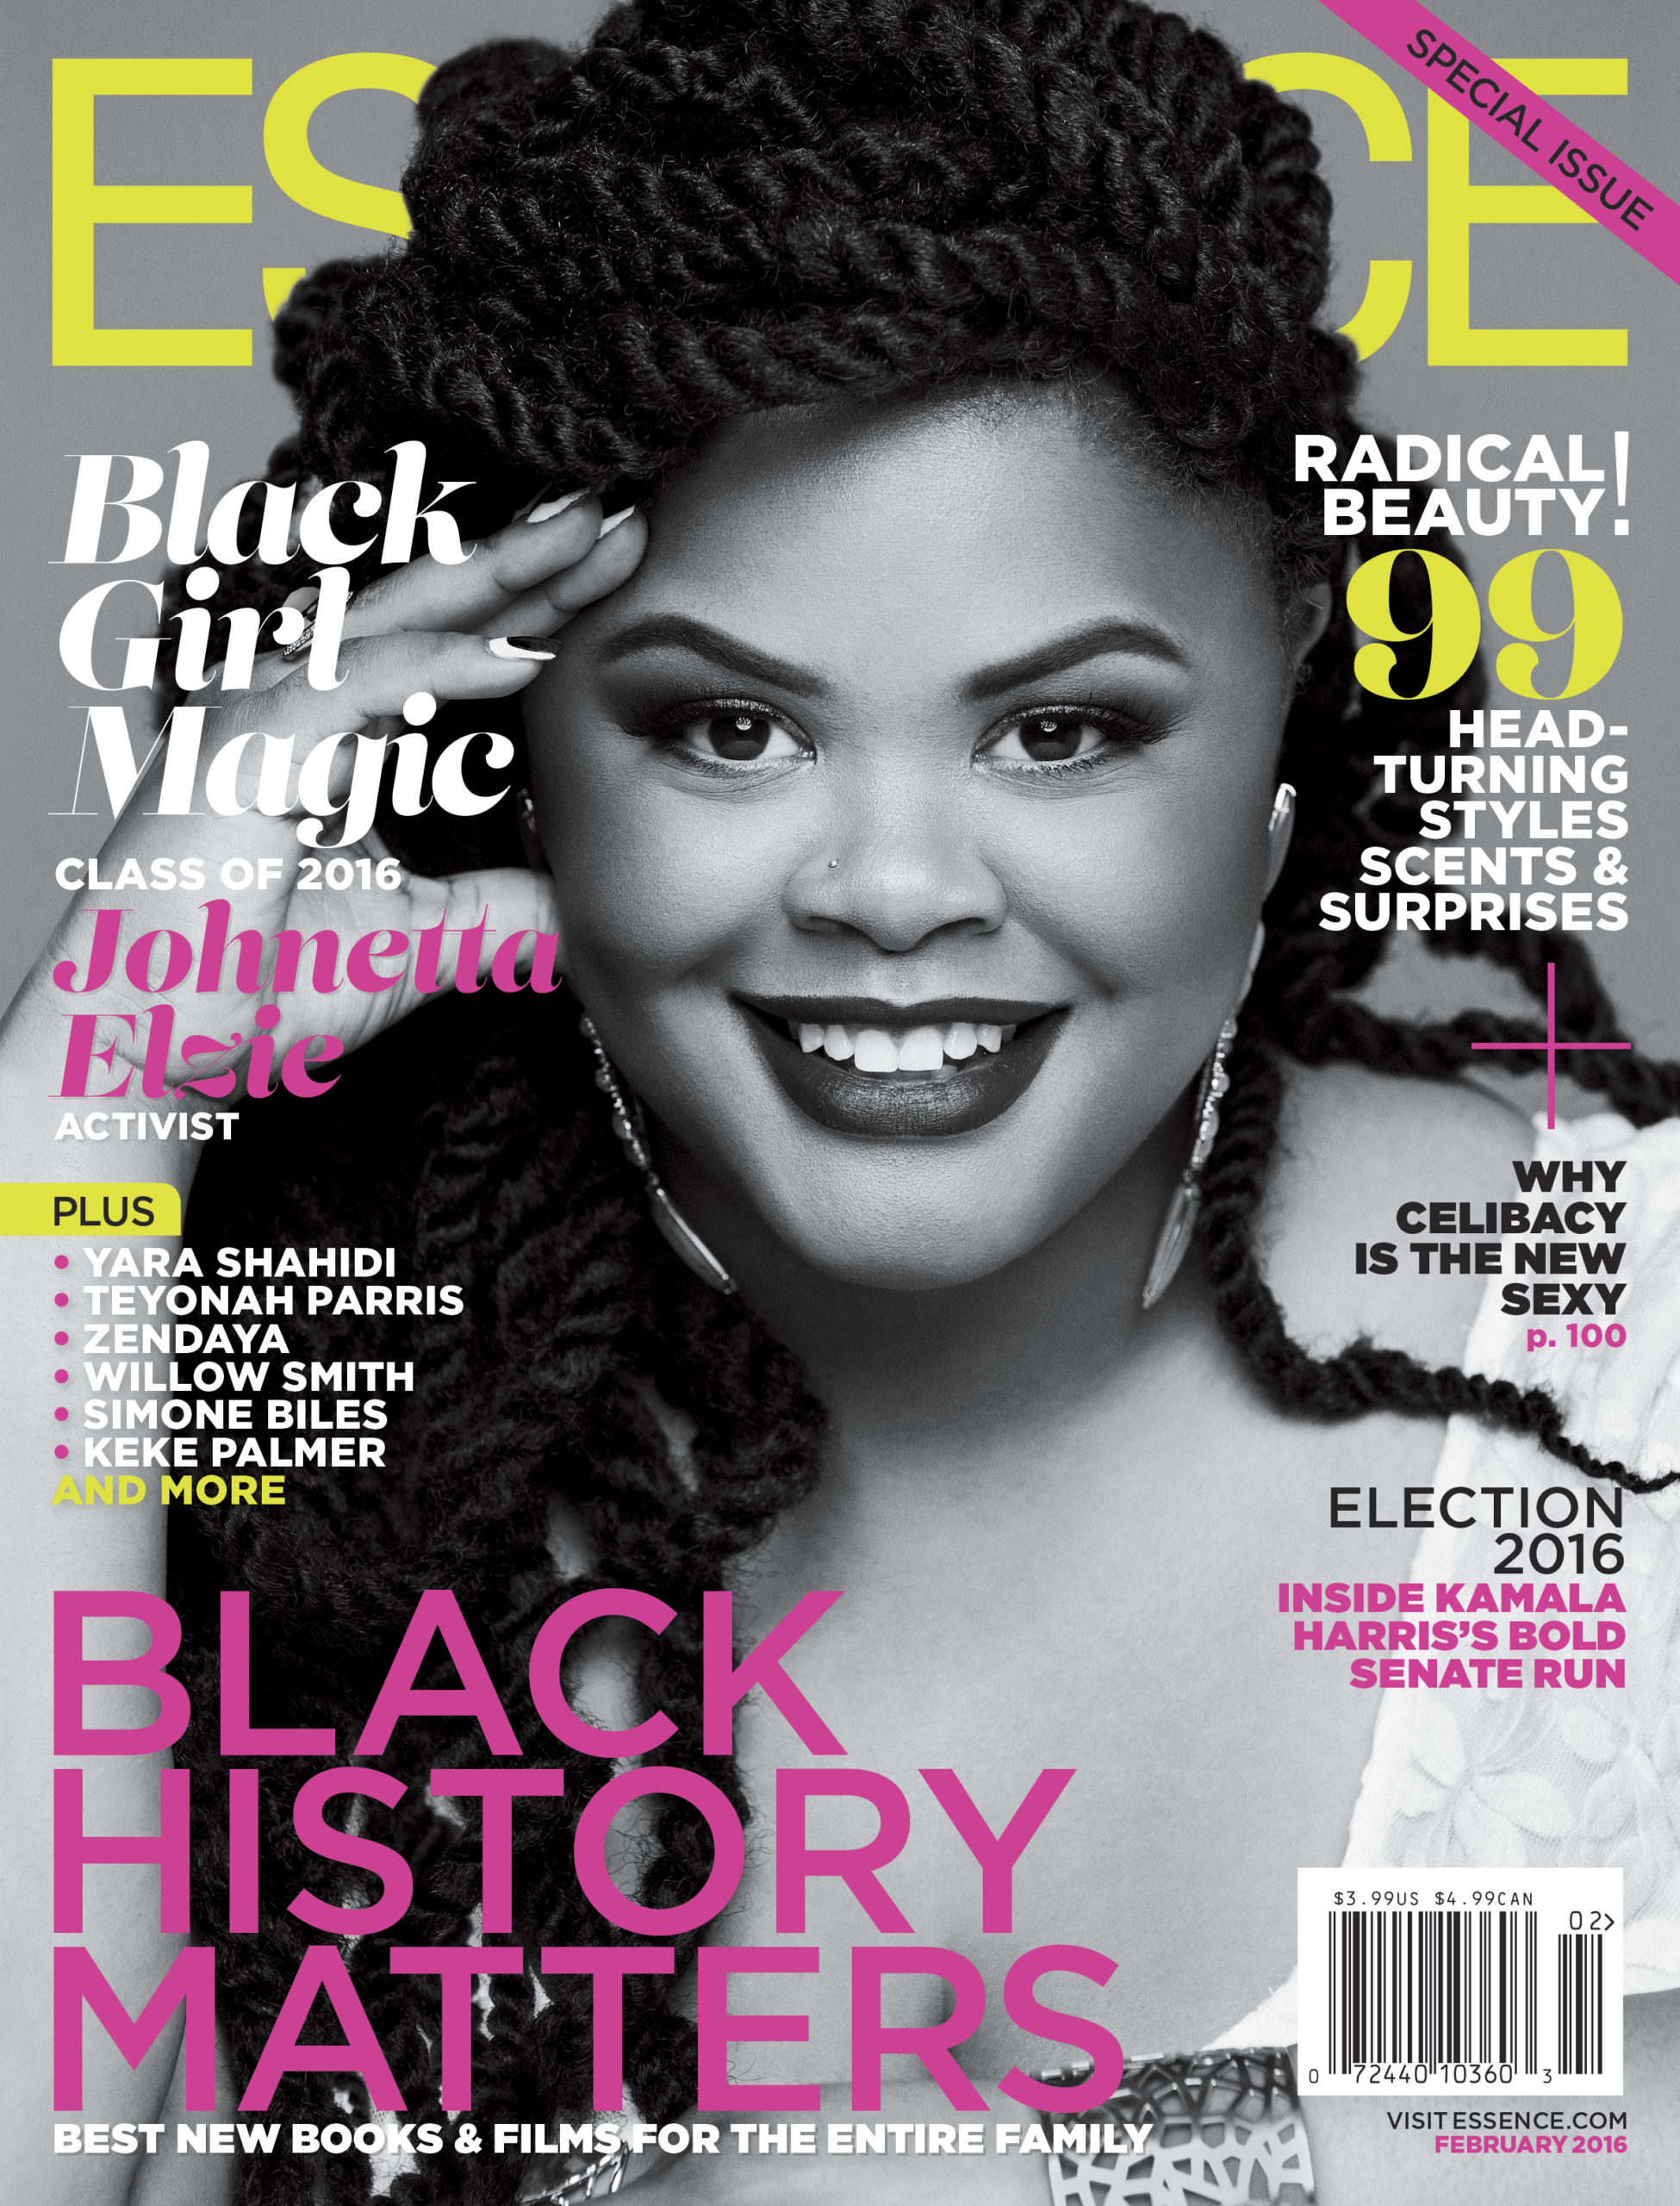 Jonetta Elzie Essence Cover ESSENCE DEBUTS ITS FIRST "BLACK GIRL MAGIC" ISSUE WITH THREE COVERS